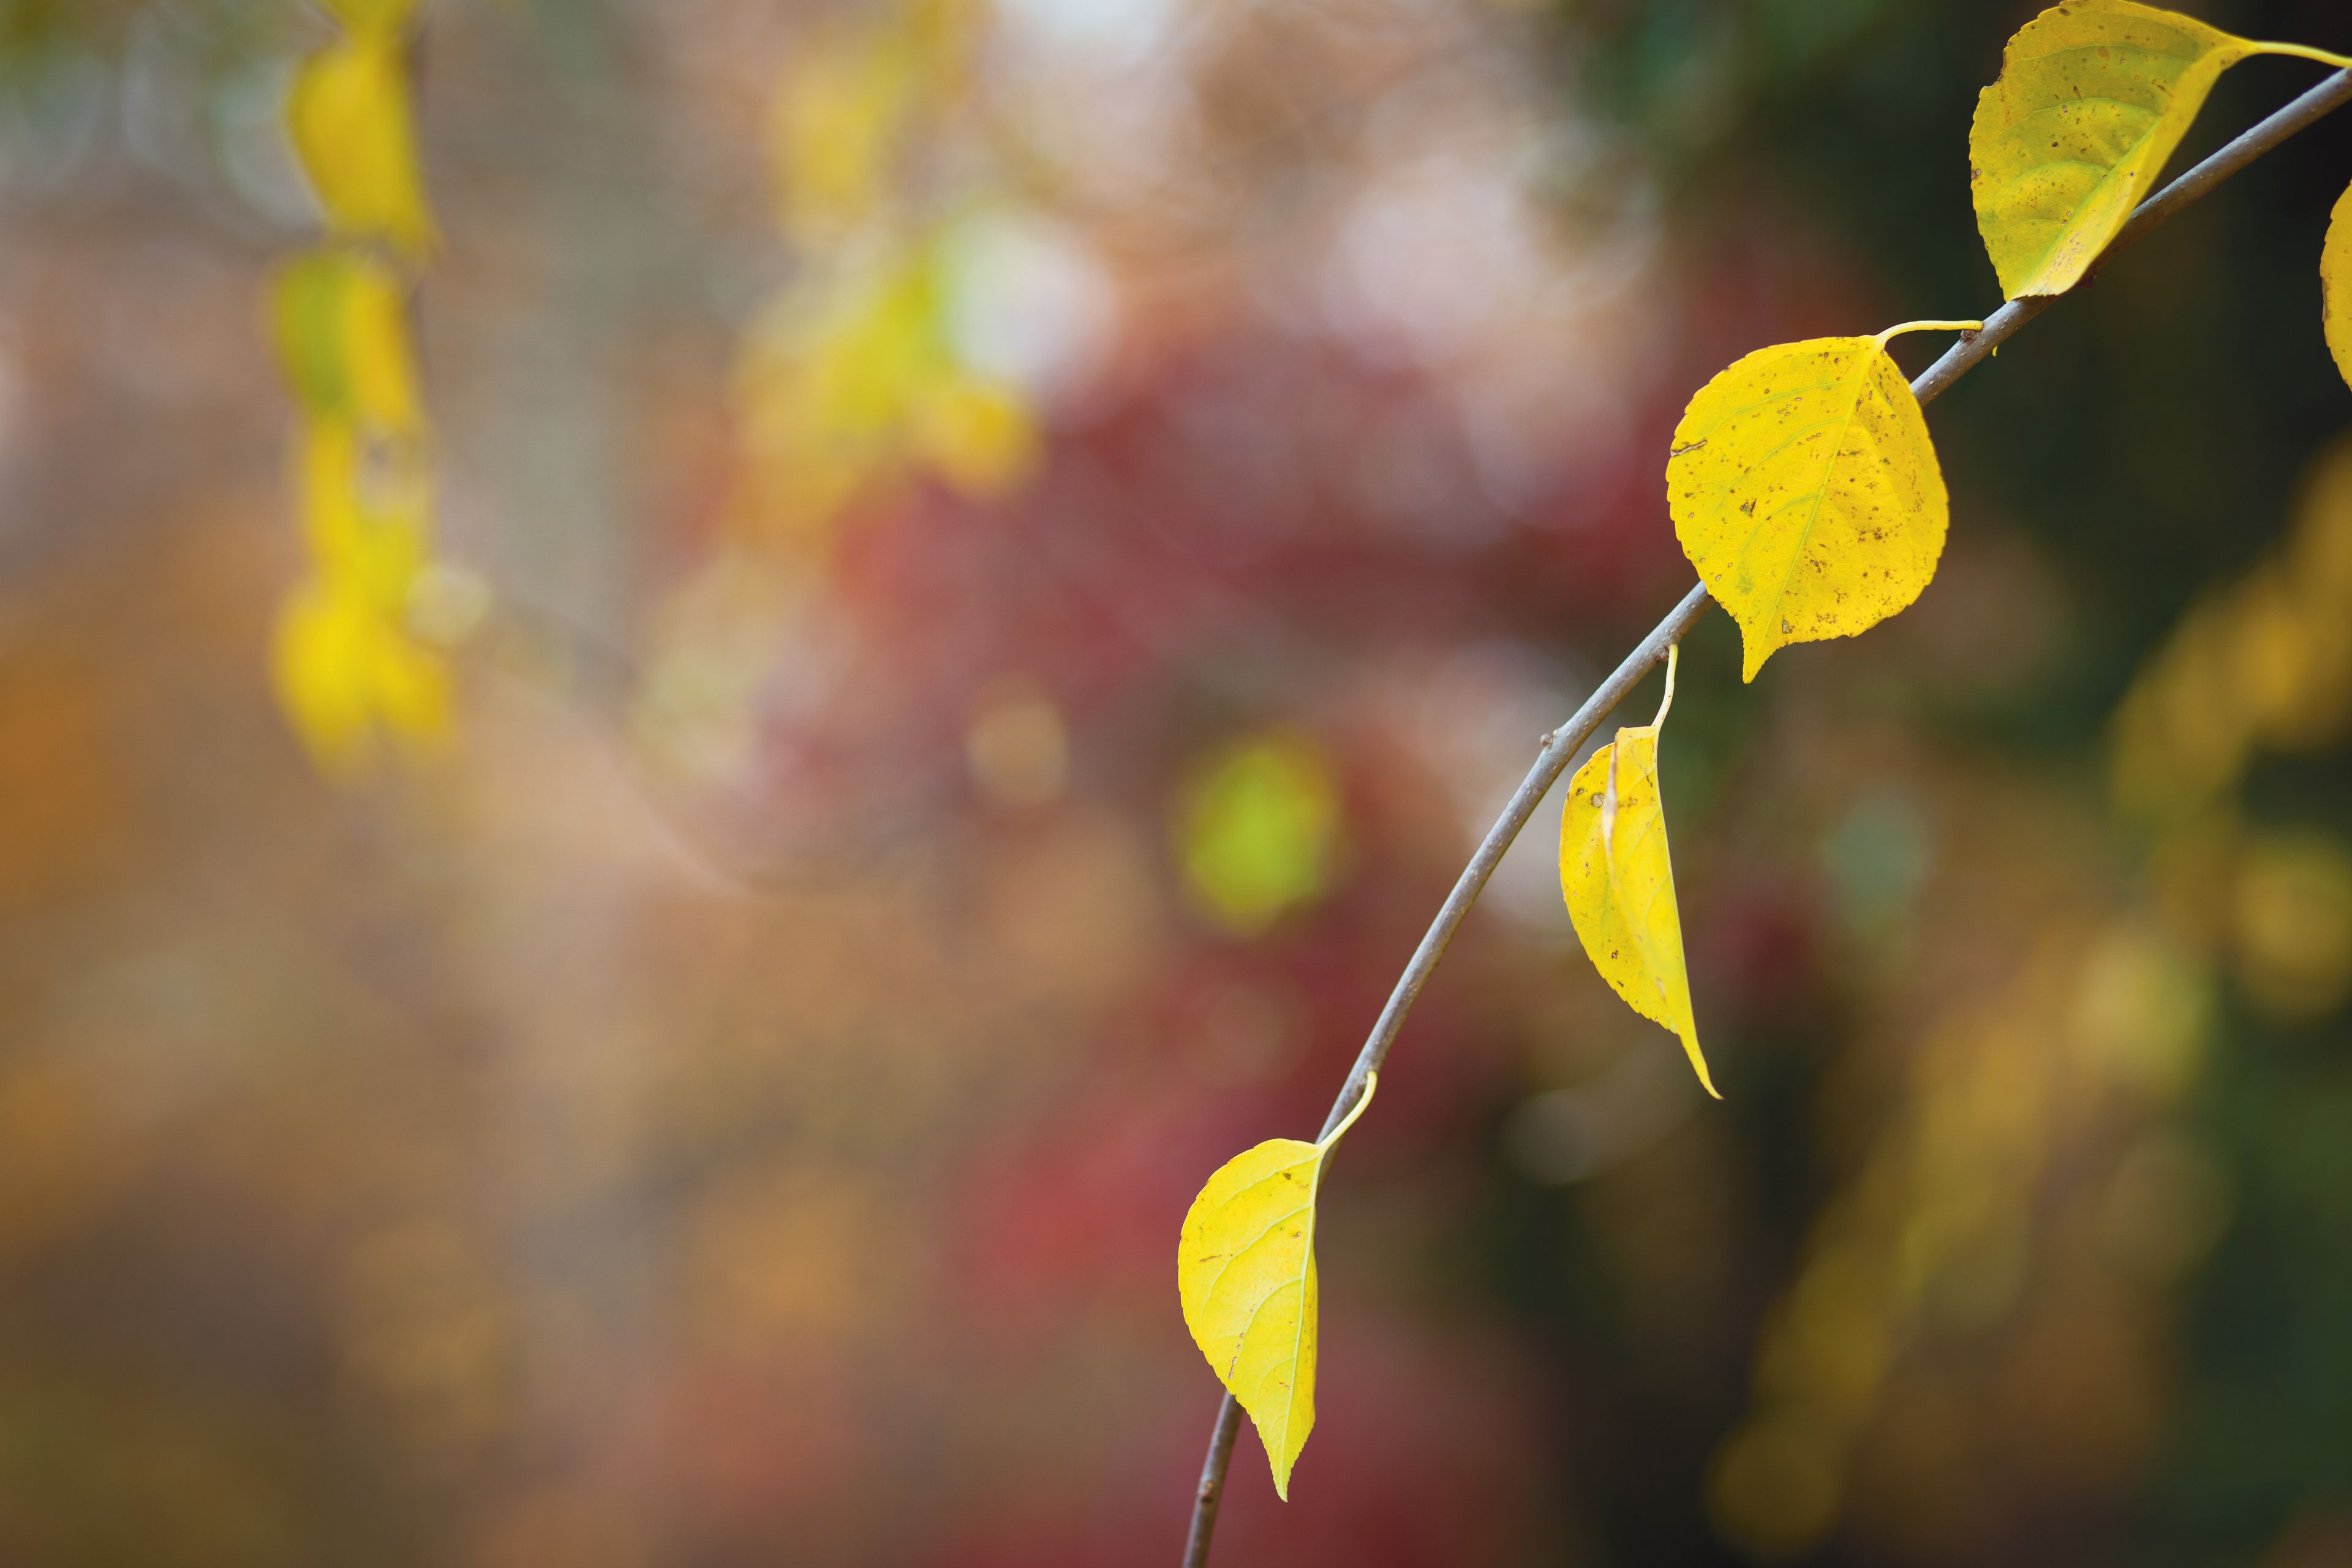 A branch with a few yellow leaves.